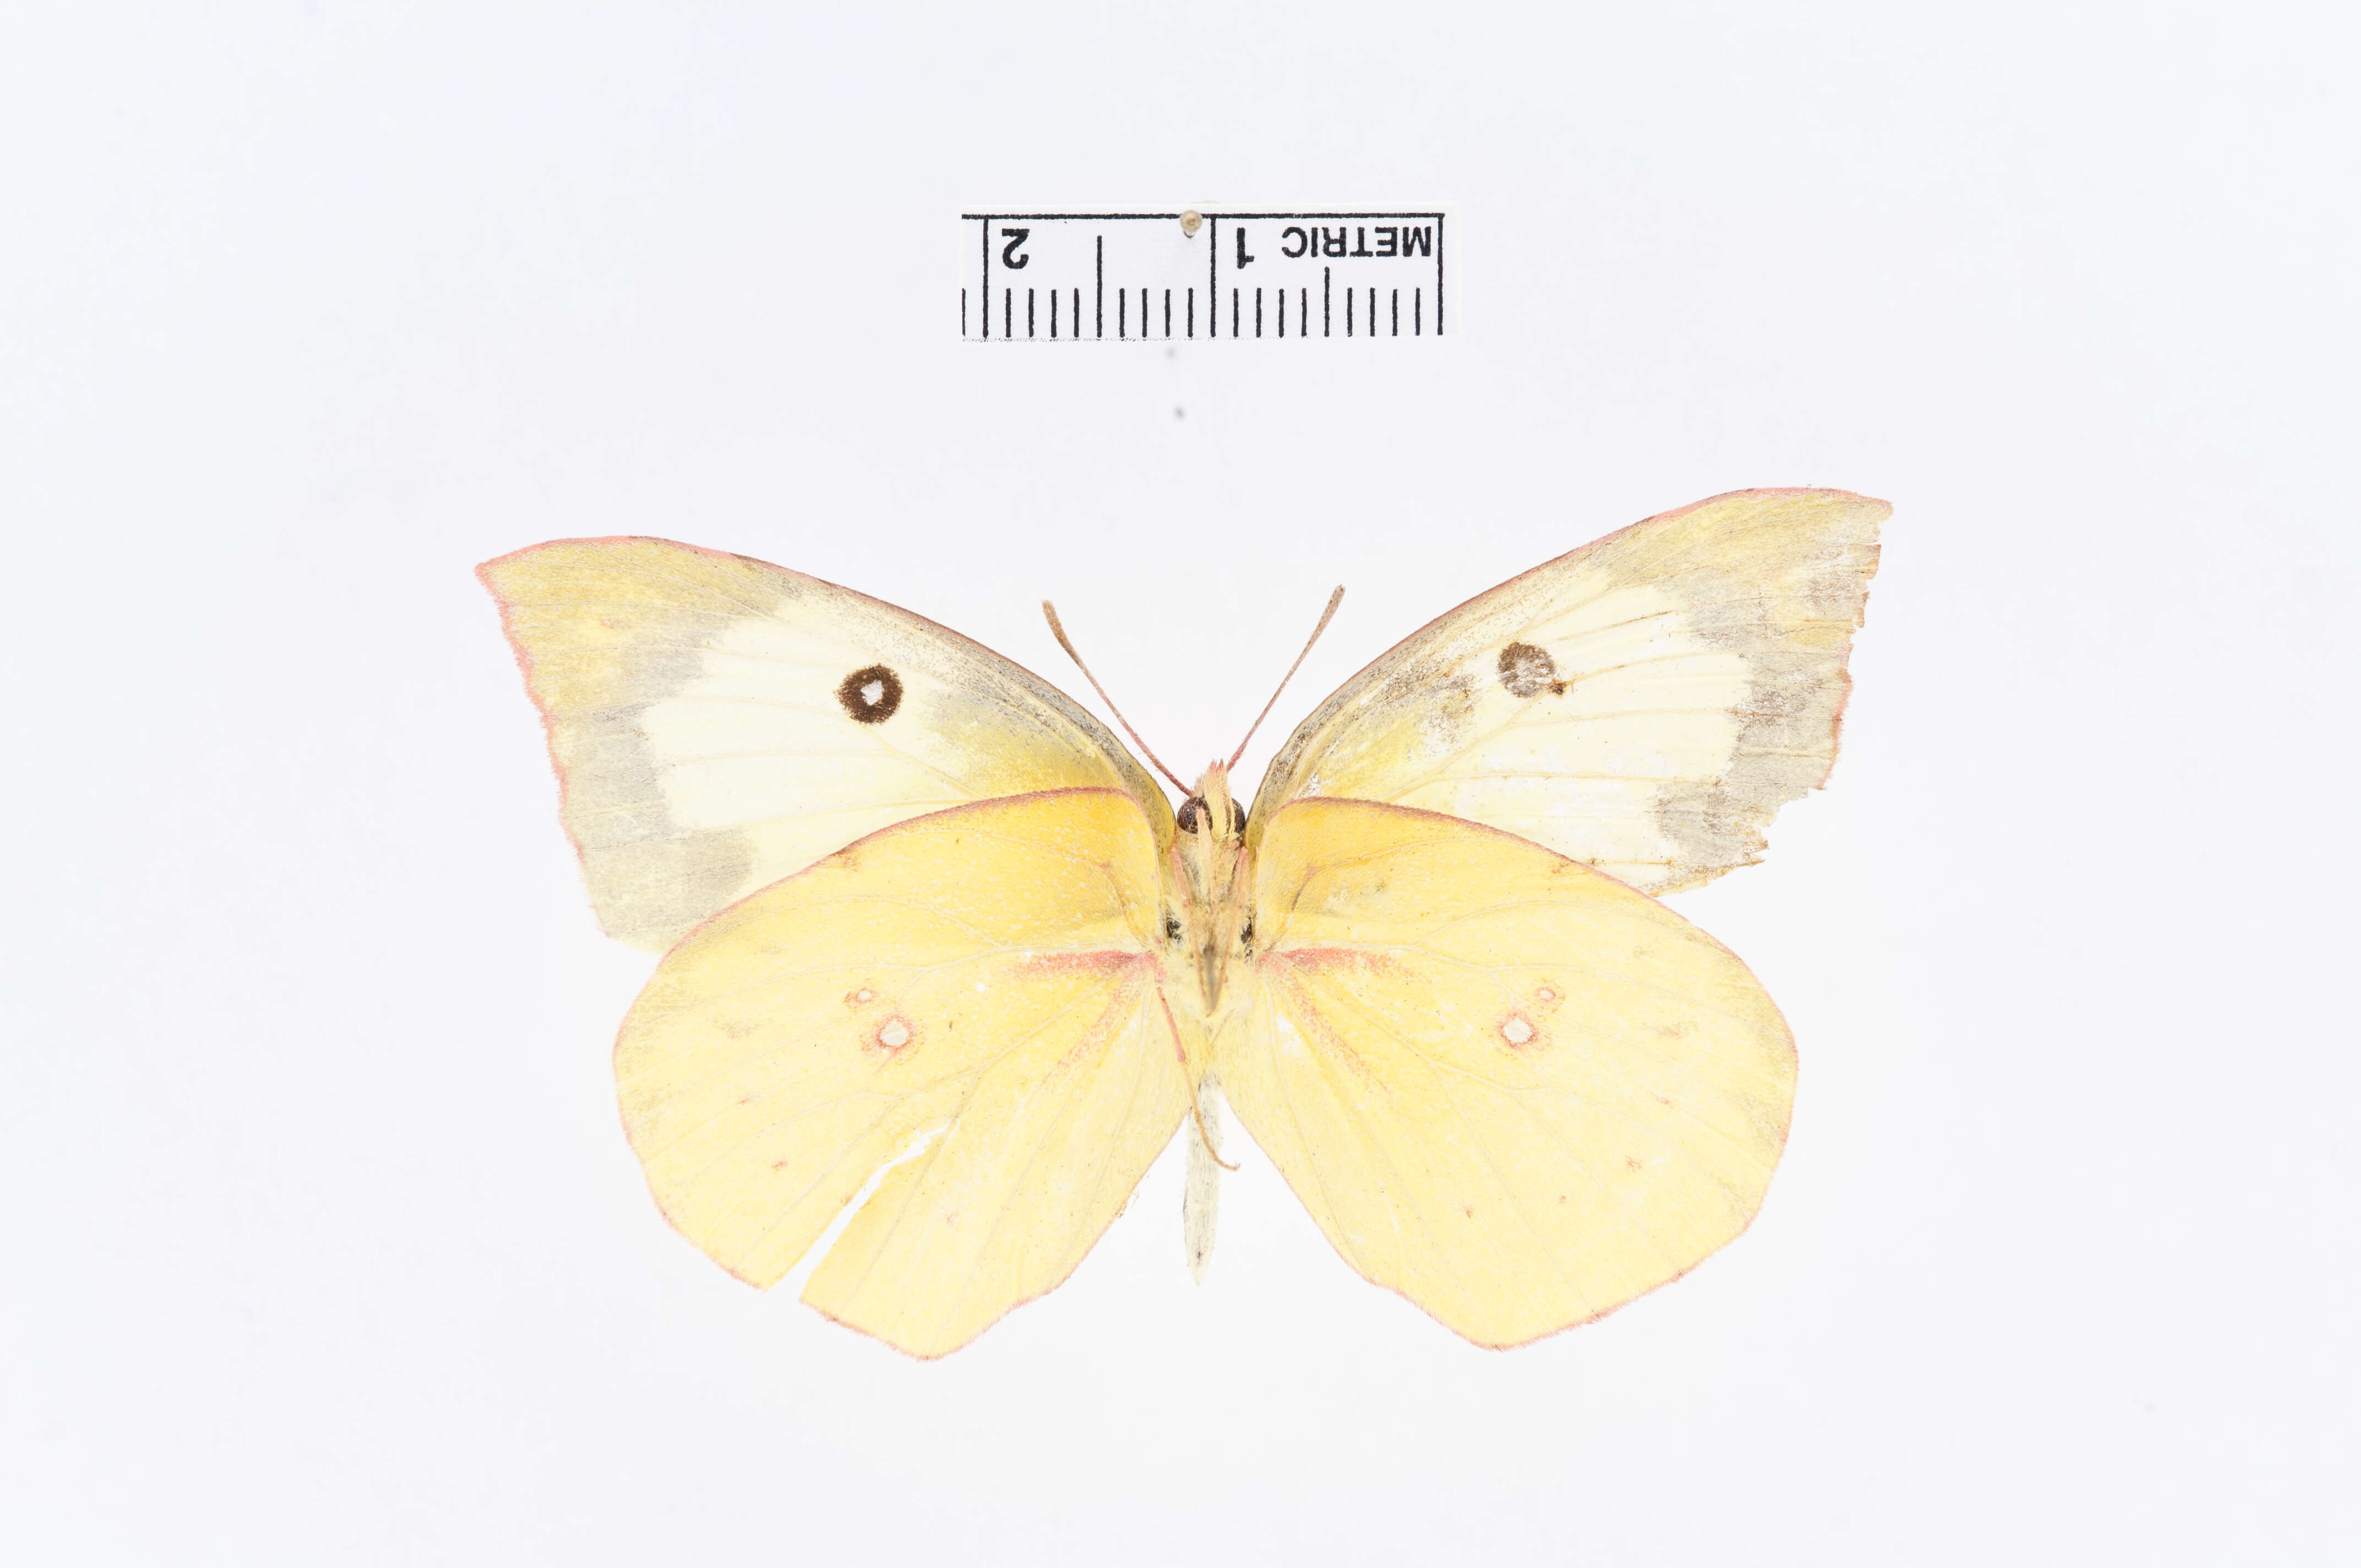 Image of Colias cesonia (Stoll 1790)